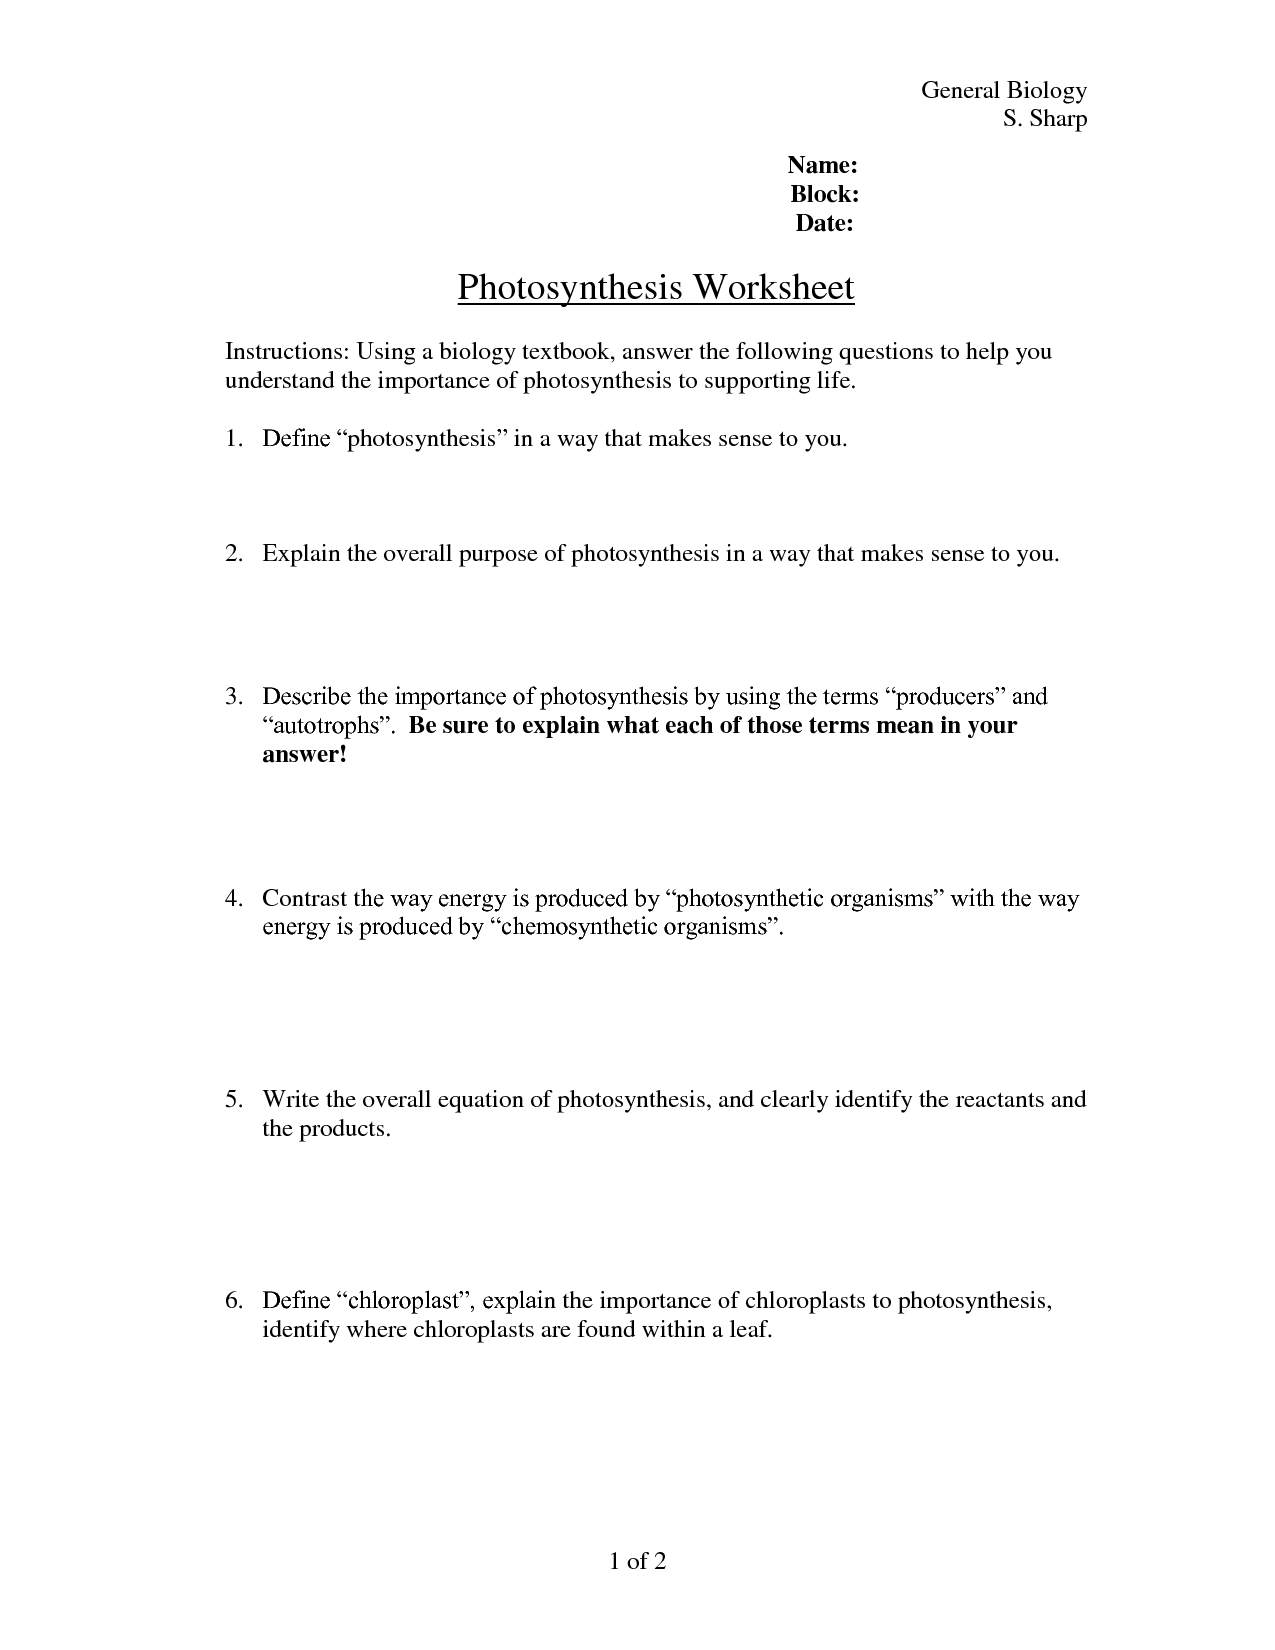 17 Best Images of Photosynthesis Review Worksheet Photosynthesis and